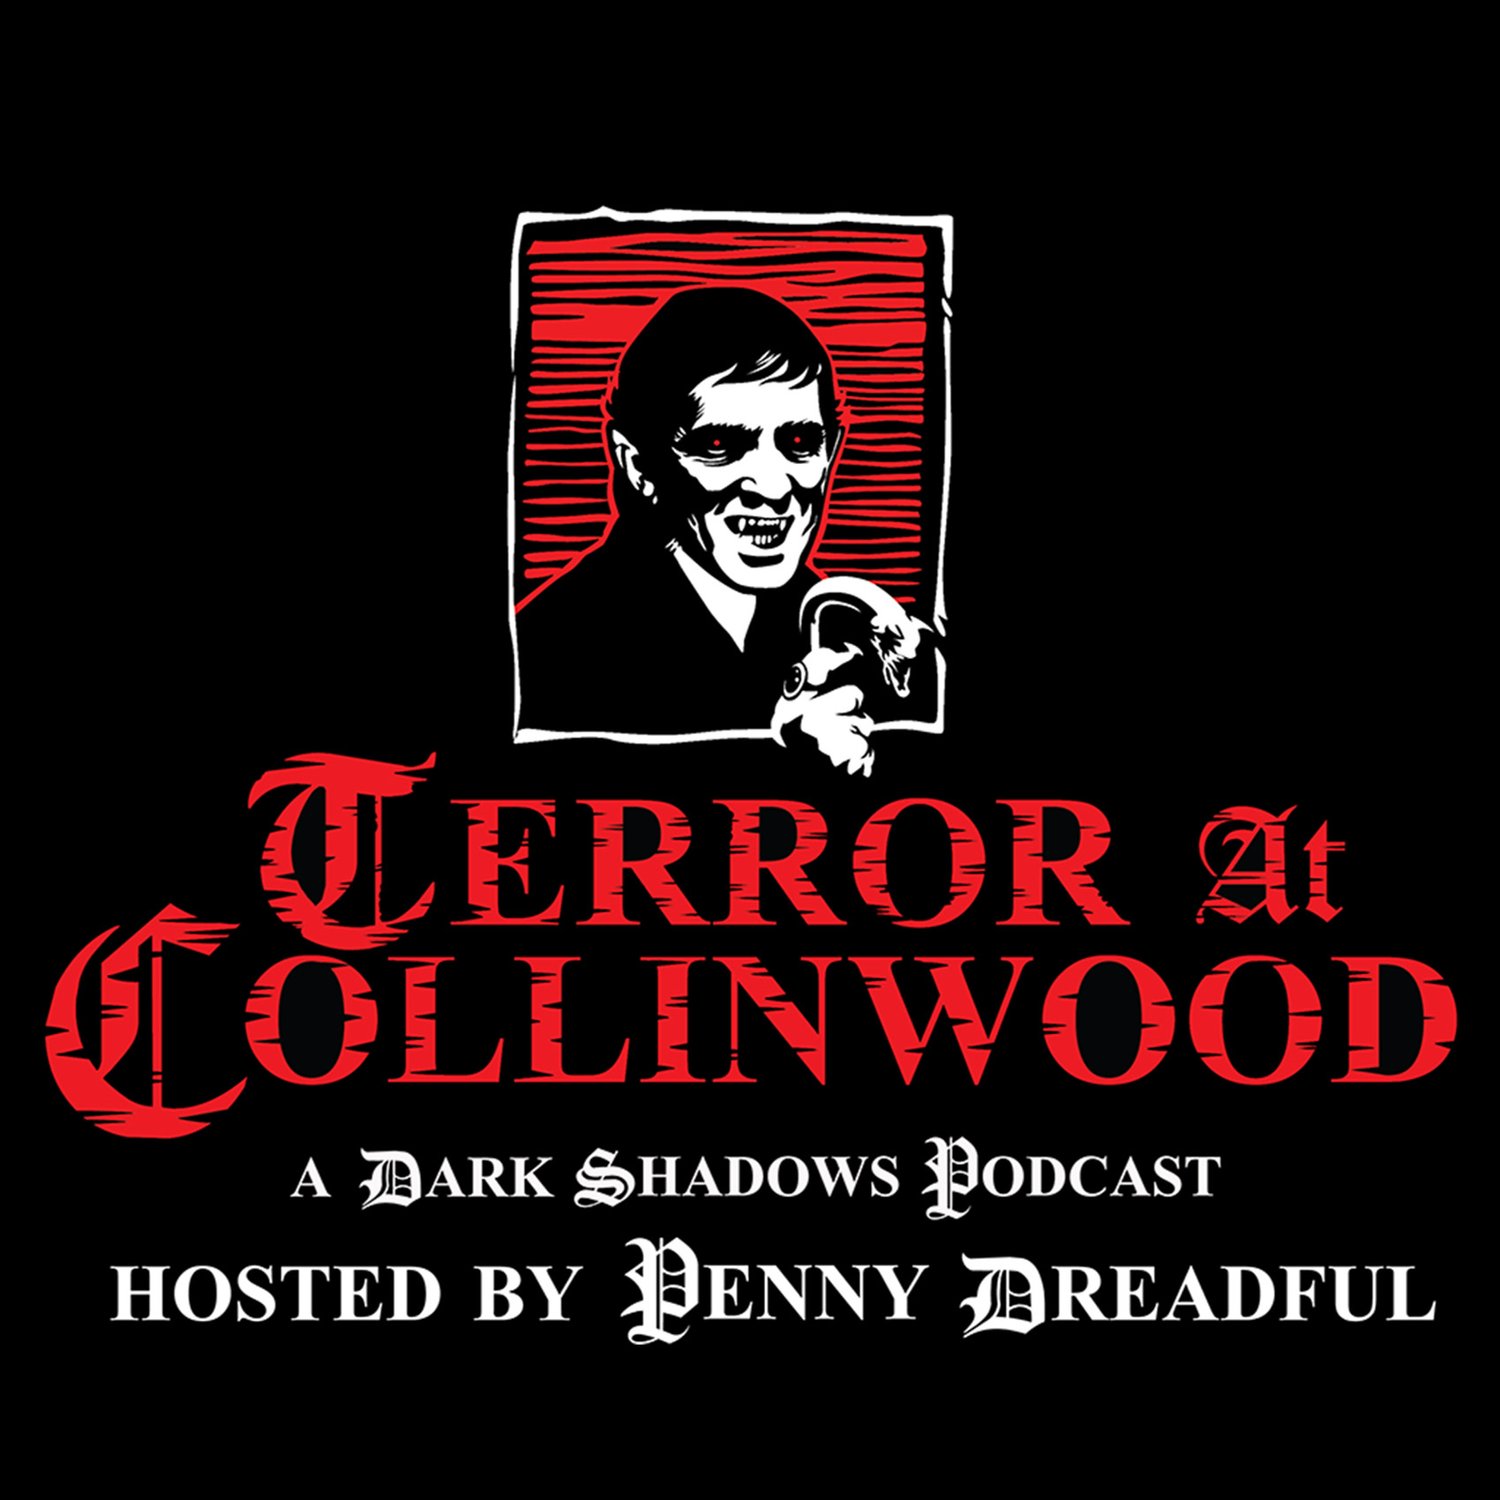 Terror at Collinwood Episode 79: London Bridge & A Country Road with Sharon Smyth Lentz and Barry Dodd